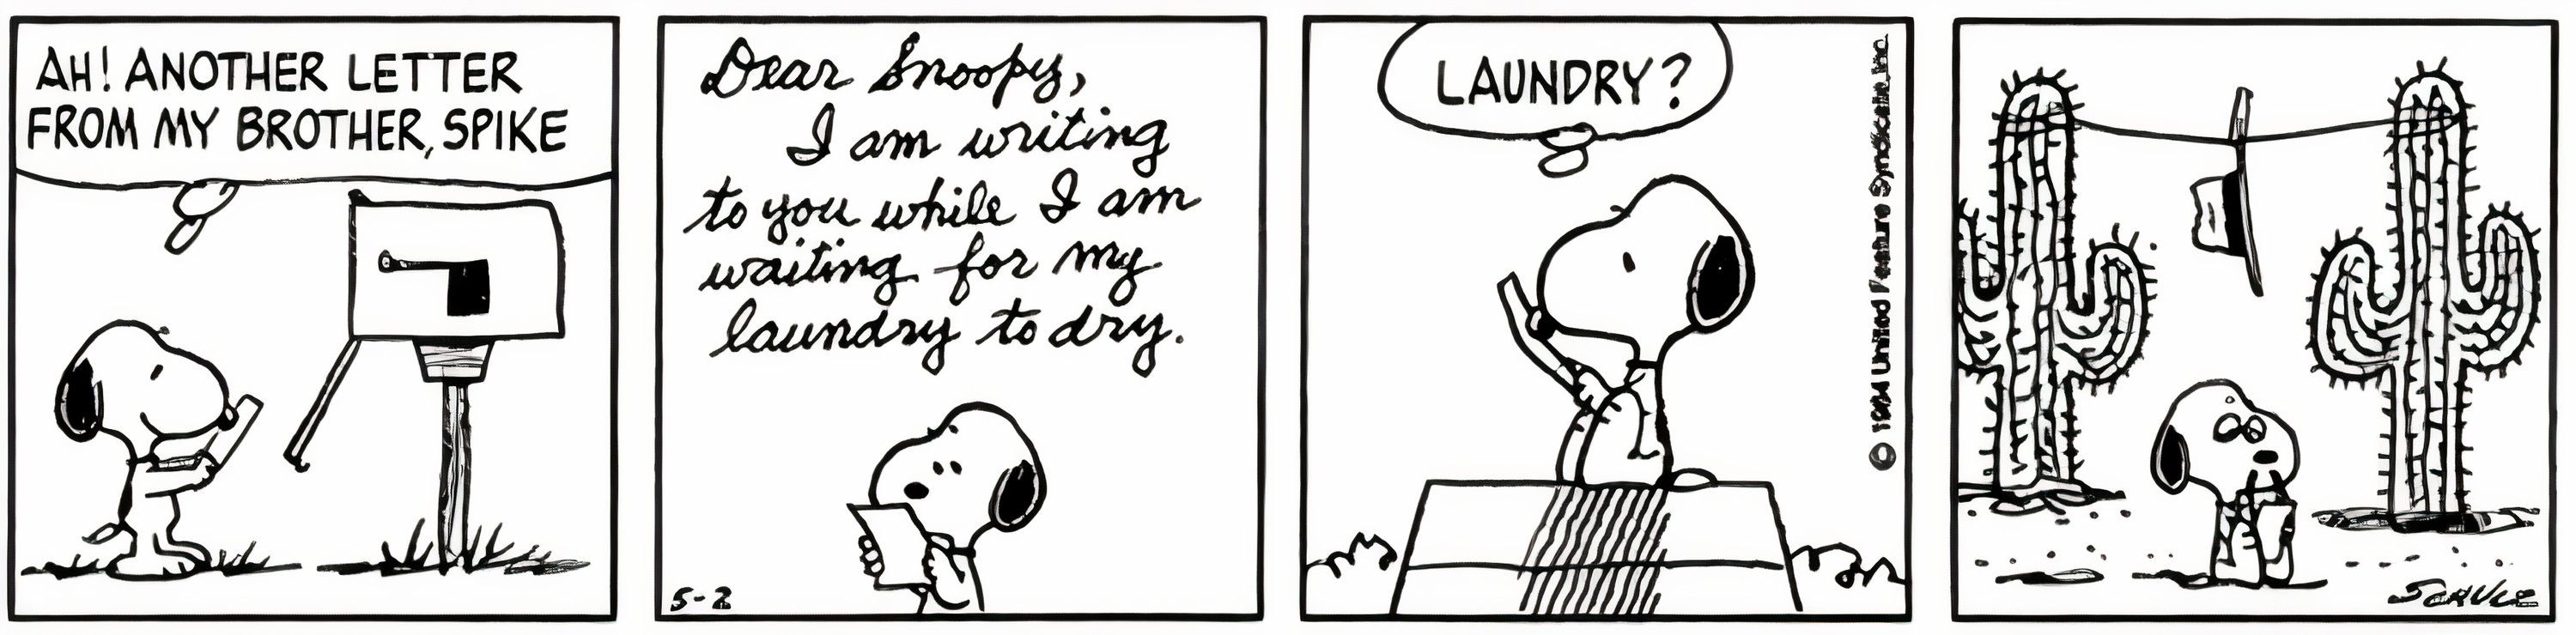 Peanuts, Snoopy and his brother exchange letters; Snoopy is perplexed by the concept of 